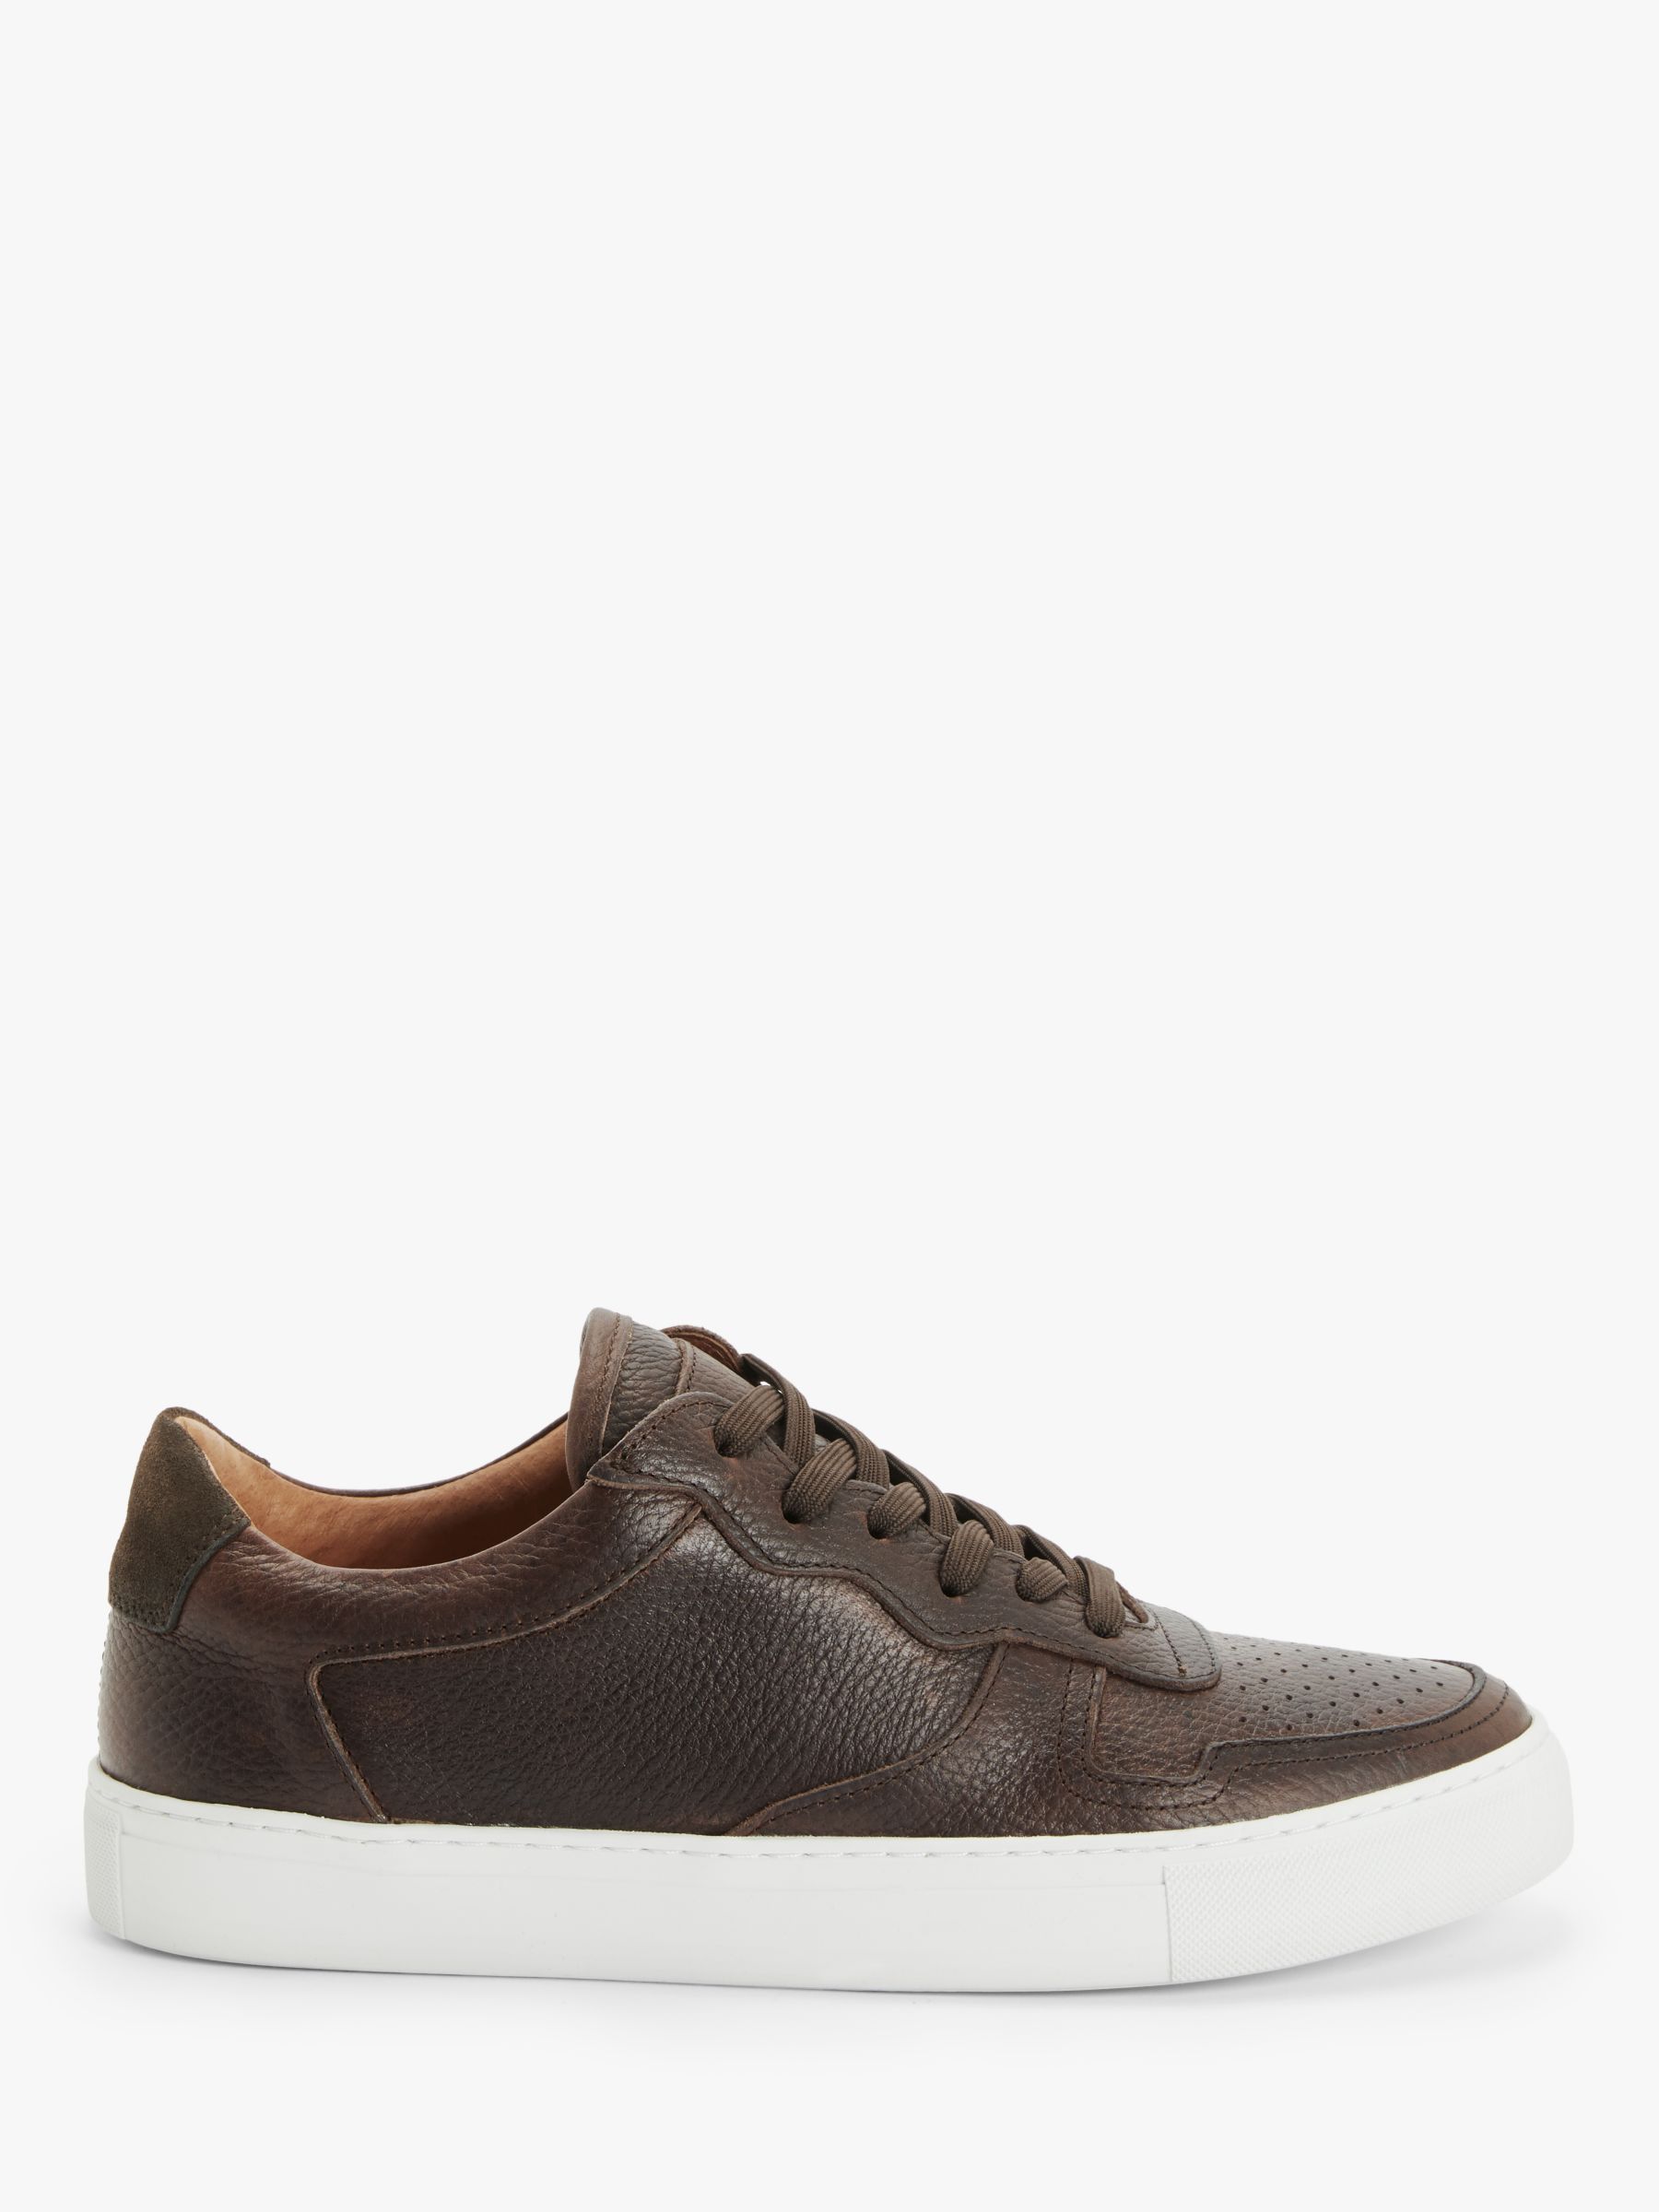 John Lewis & Partners Leather Cupsole Trainers, Brown